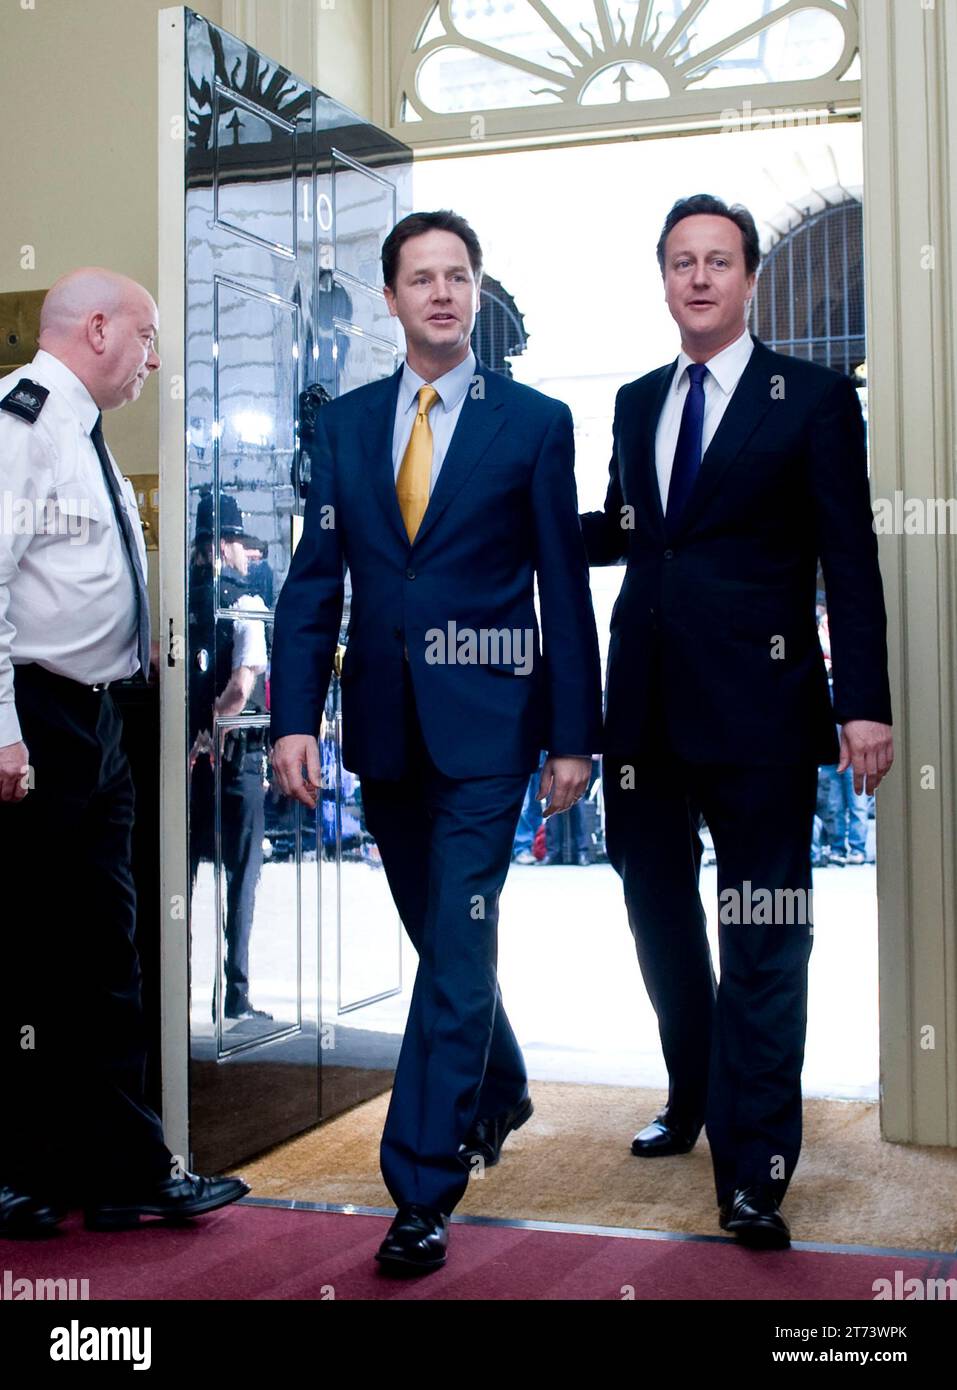 London, UK. 12th May, 2010. Image © Licensed to Parsons Media. 13/11/2023. London, United Kingdom. David Cameron appointed Foreign Secretary. Britain's new Prime Minister David Cameron with the Deputy Prime Minster Nick Clegg walk into the Cabinet room together for the first time at Number 10 Downing St, Wednesday May 12, 2010 . Photo Picture by Credit: andrew parsons/Alamy Live News Stock Photo